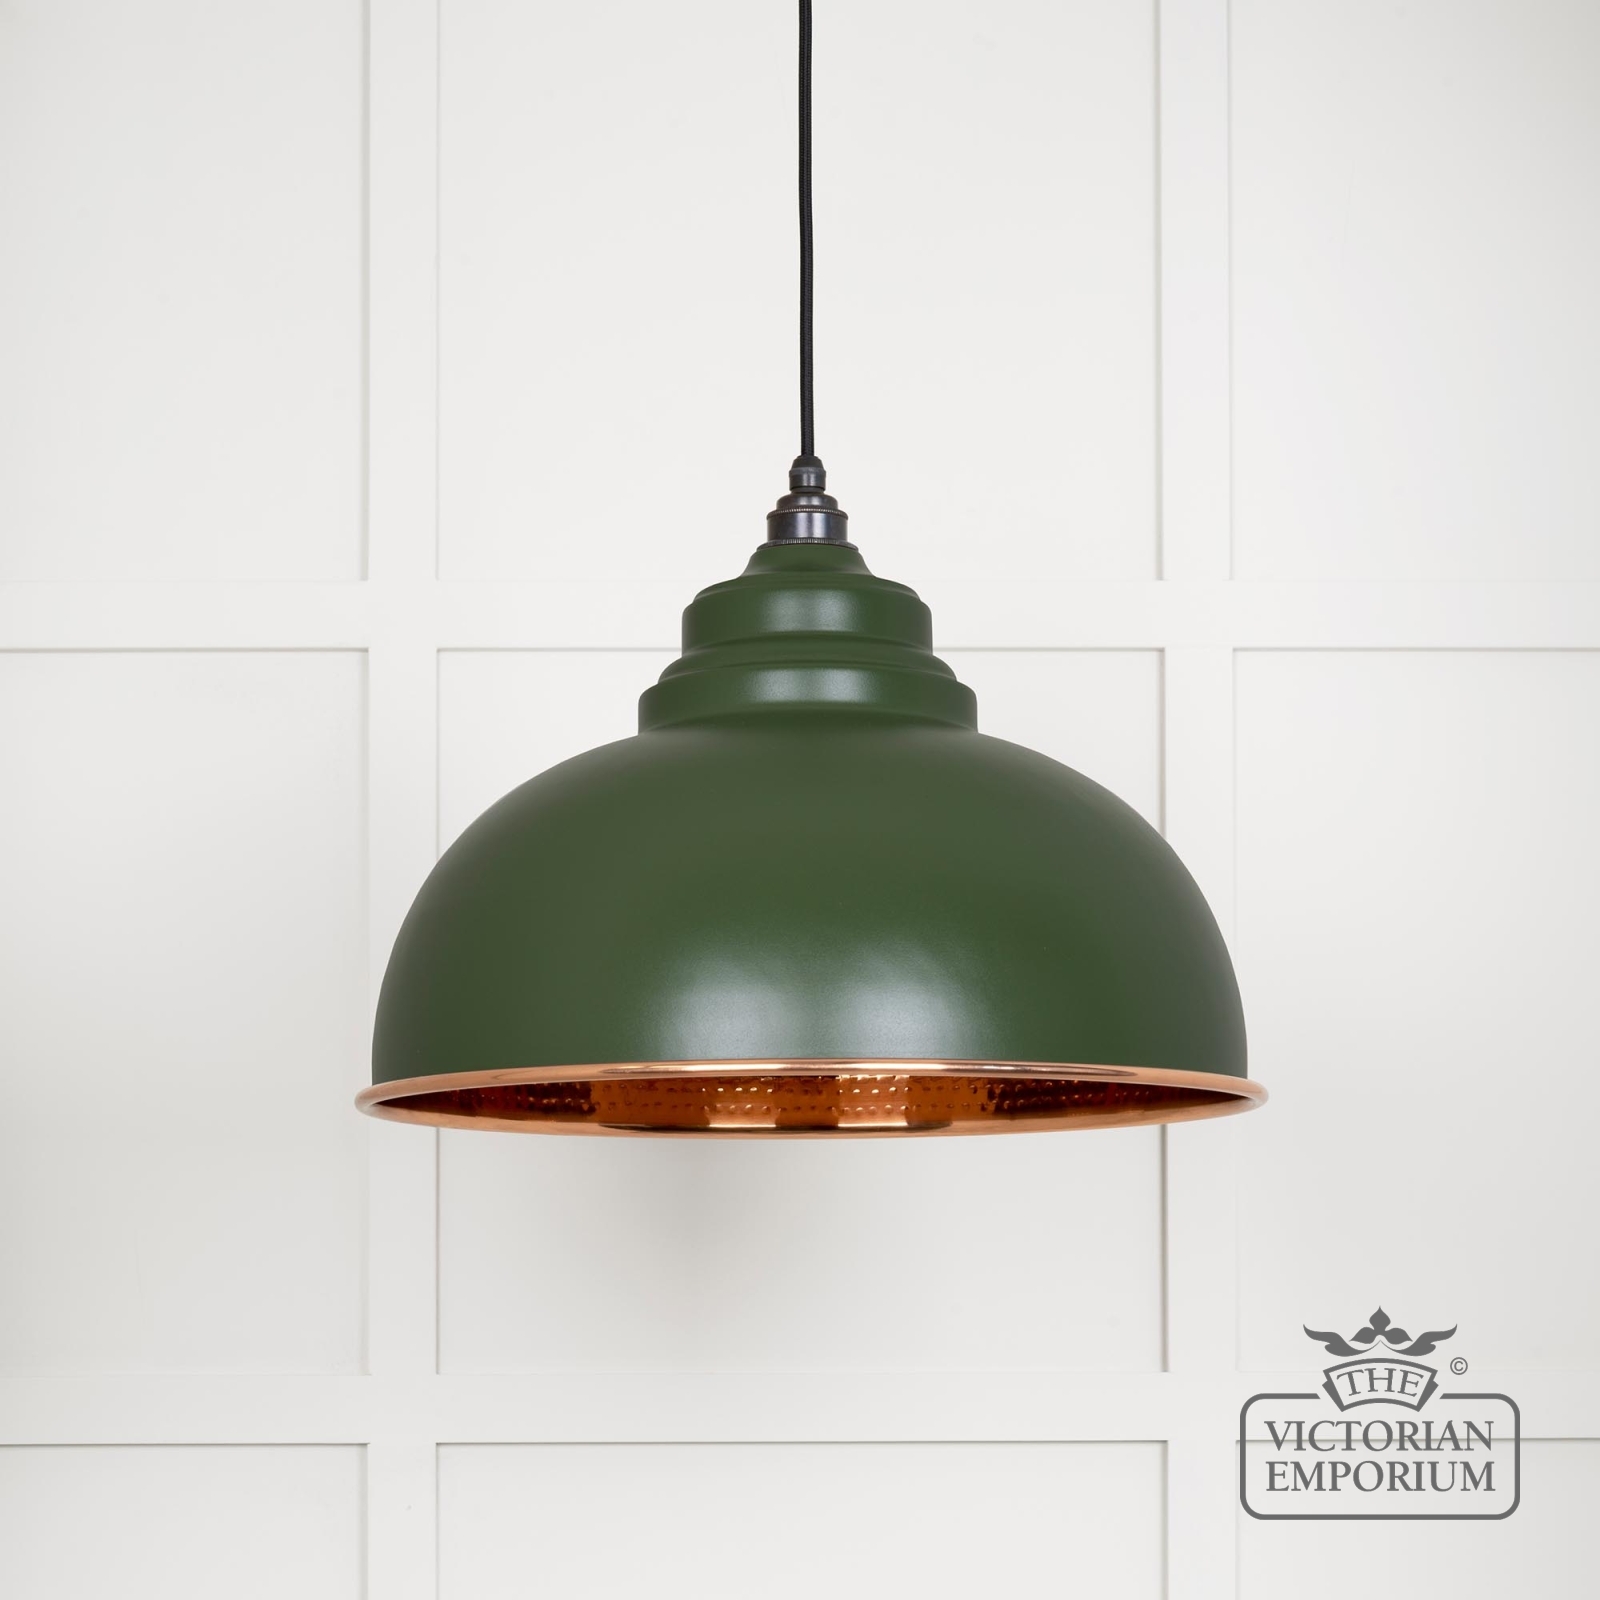 Harlow pendant light in Heath with hammered copper interior